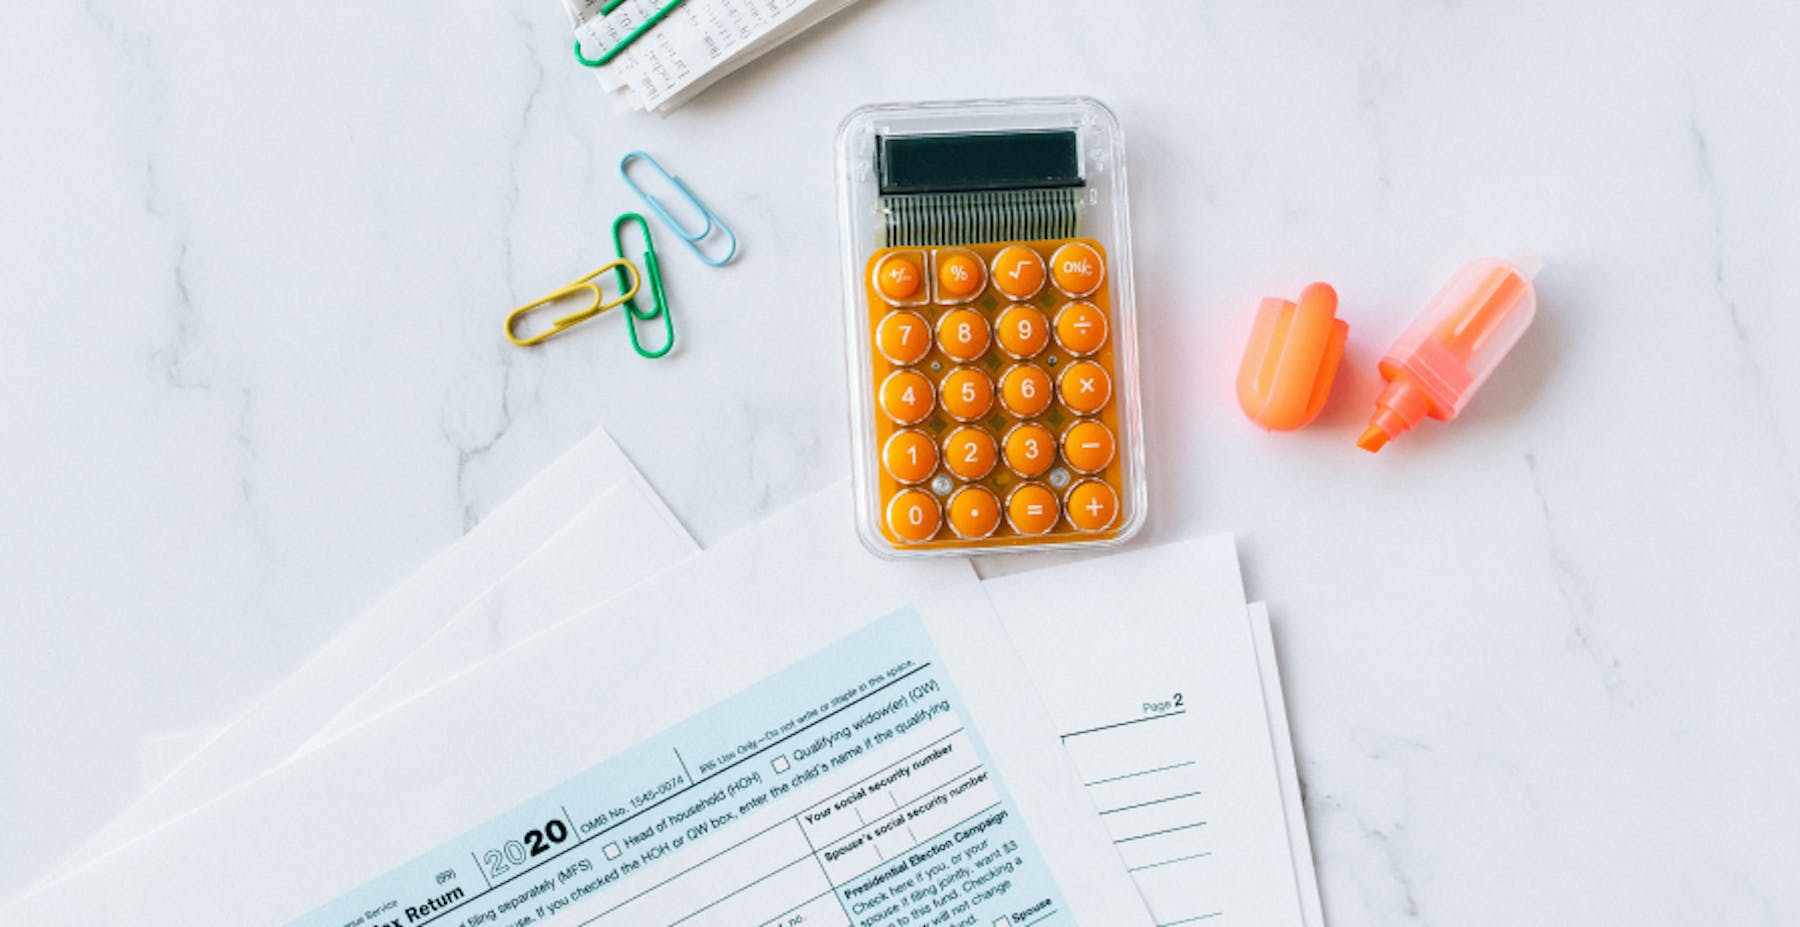 taxes and calculator on table